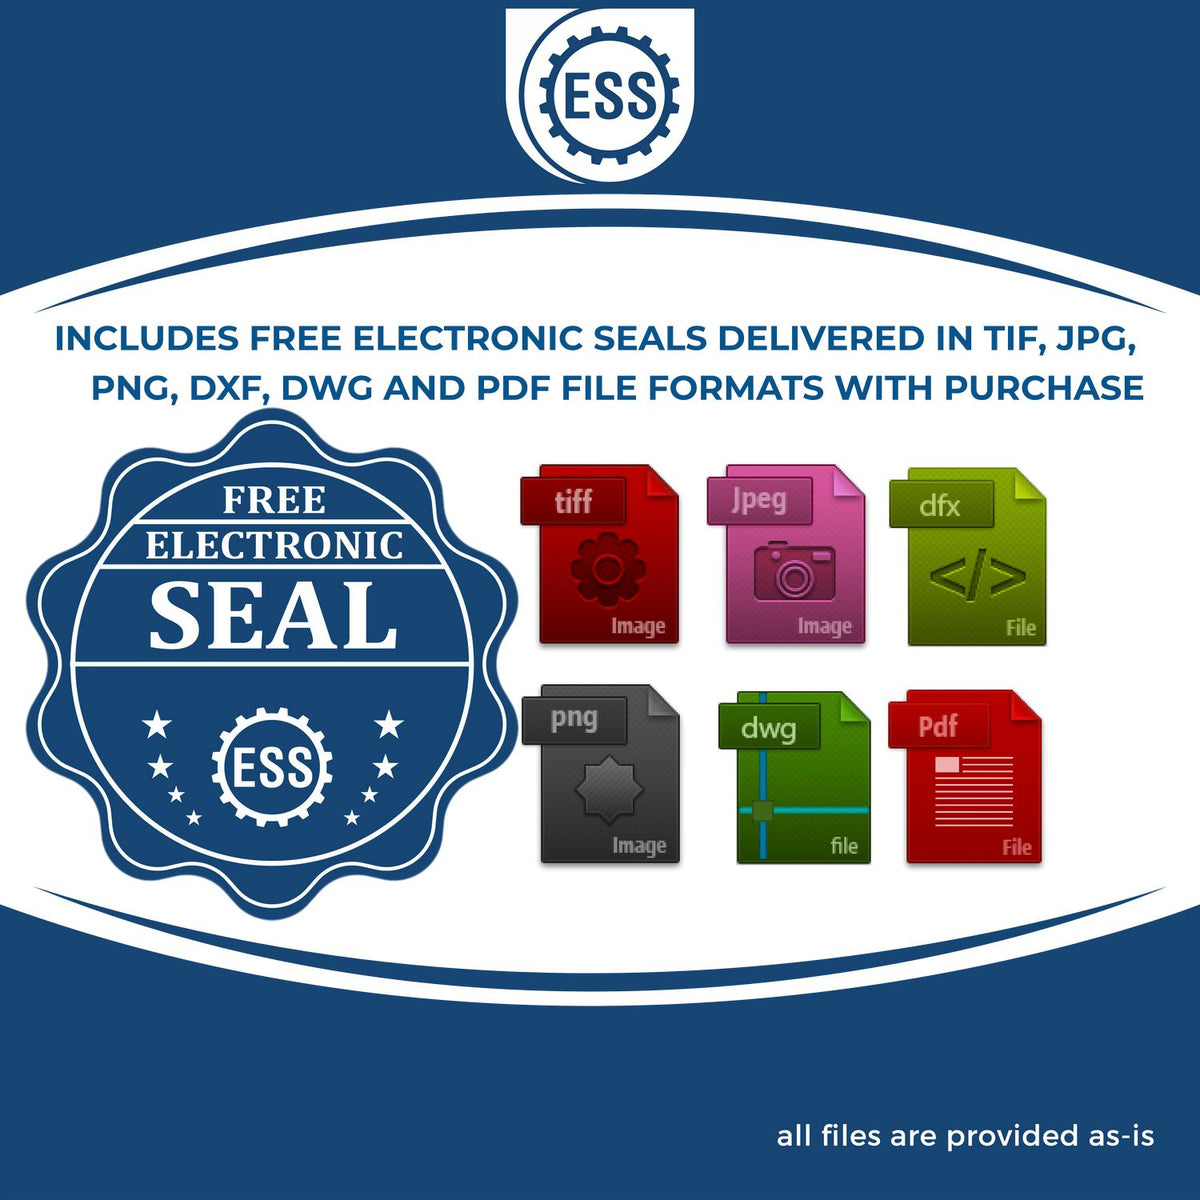 An infographic for the free electronic seal for the Self-Inking Oklahoma Landscape Architect Stamp illustrating the different file type icons such as DXF, DWG, TIF, JPG and PNG.